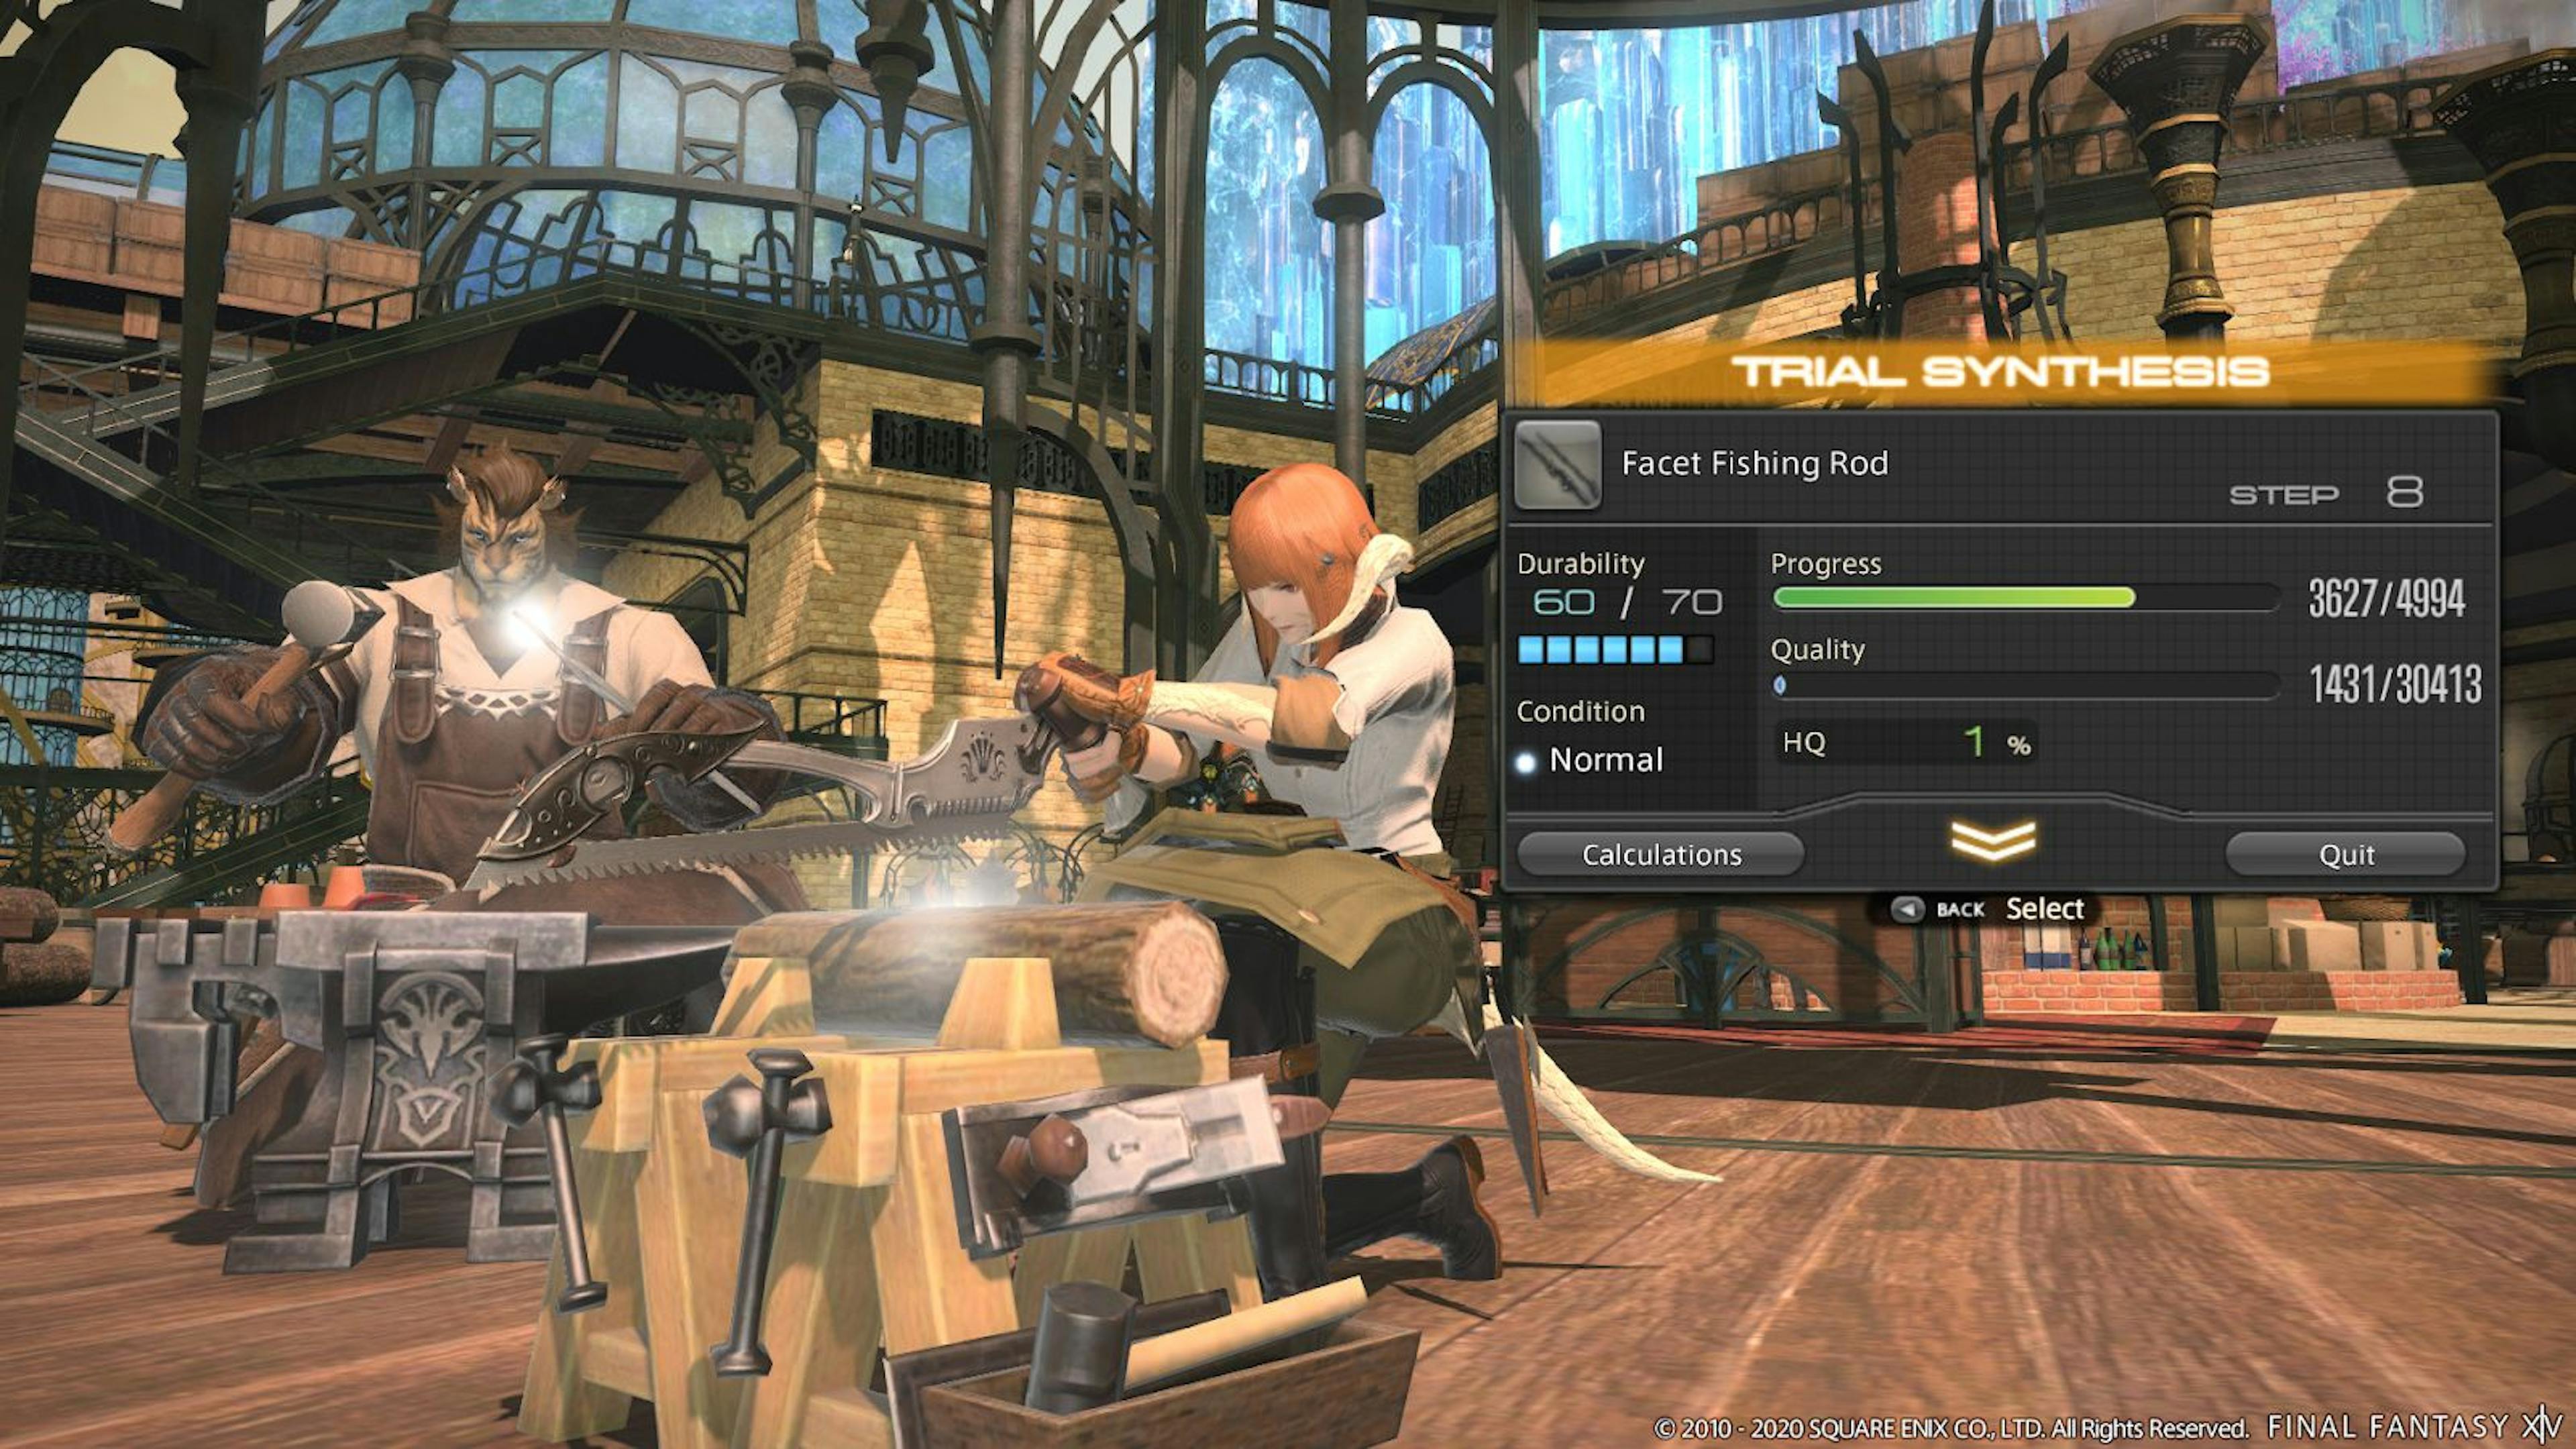 /ffxiv-crafting-guide-shadowbringers-level-1-44w33r7 feature image